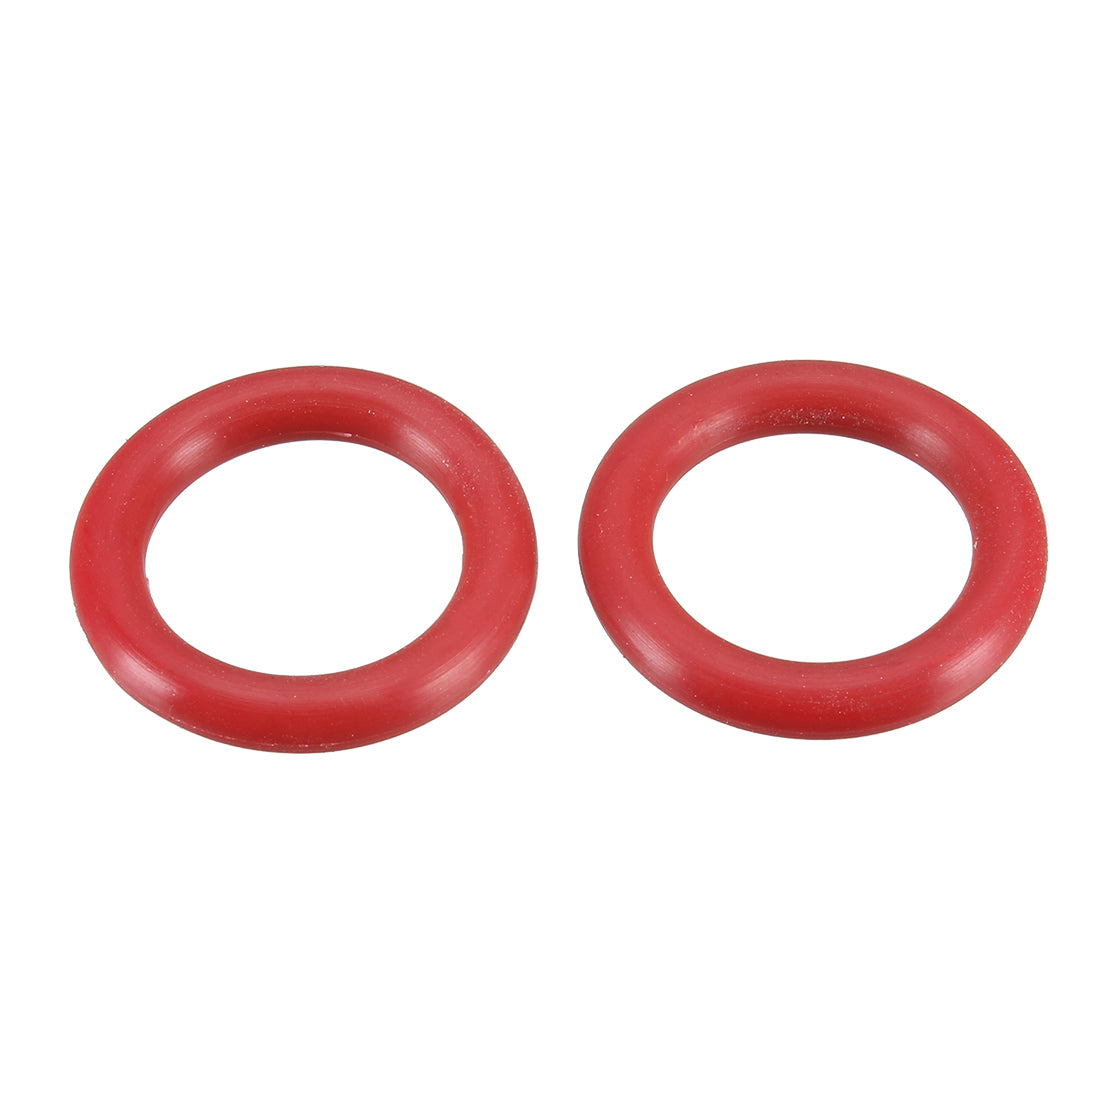 uxcell Uxcell 10 Pcs Red Rubber 22mm x 15mm x 3.5mm Oil Seal O Rings Gaskets Washers